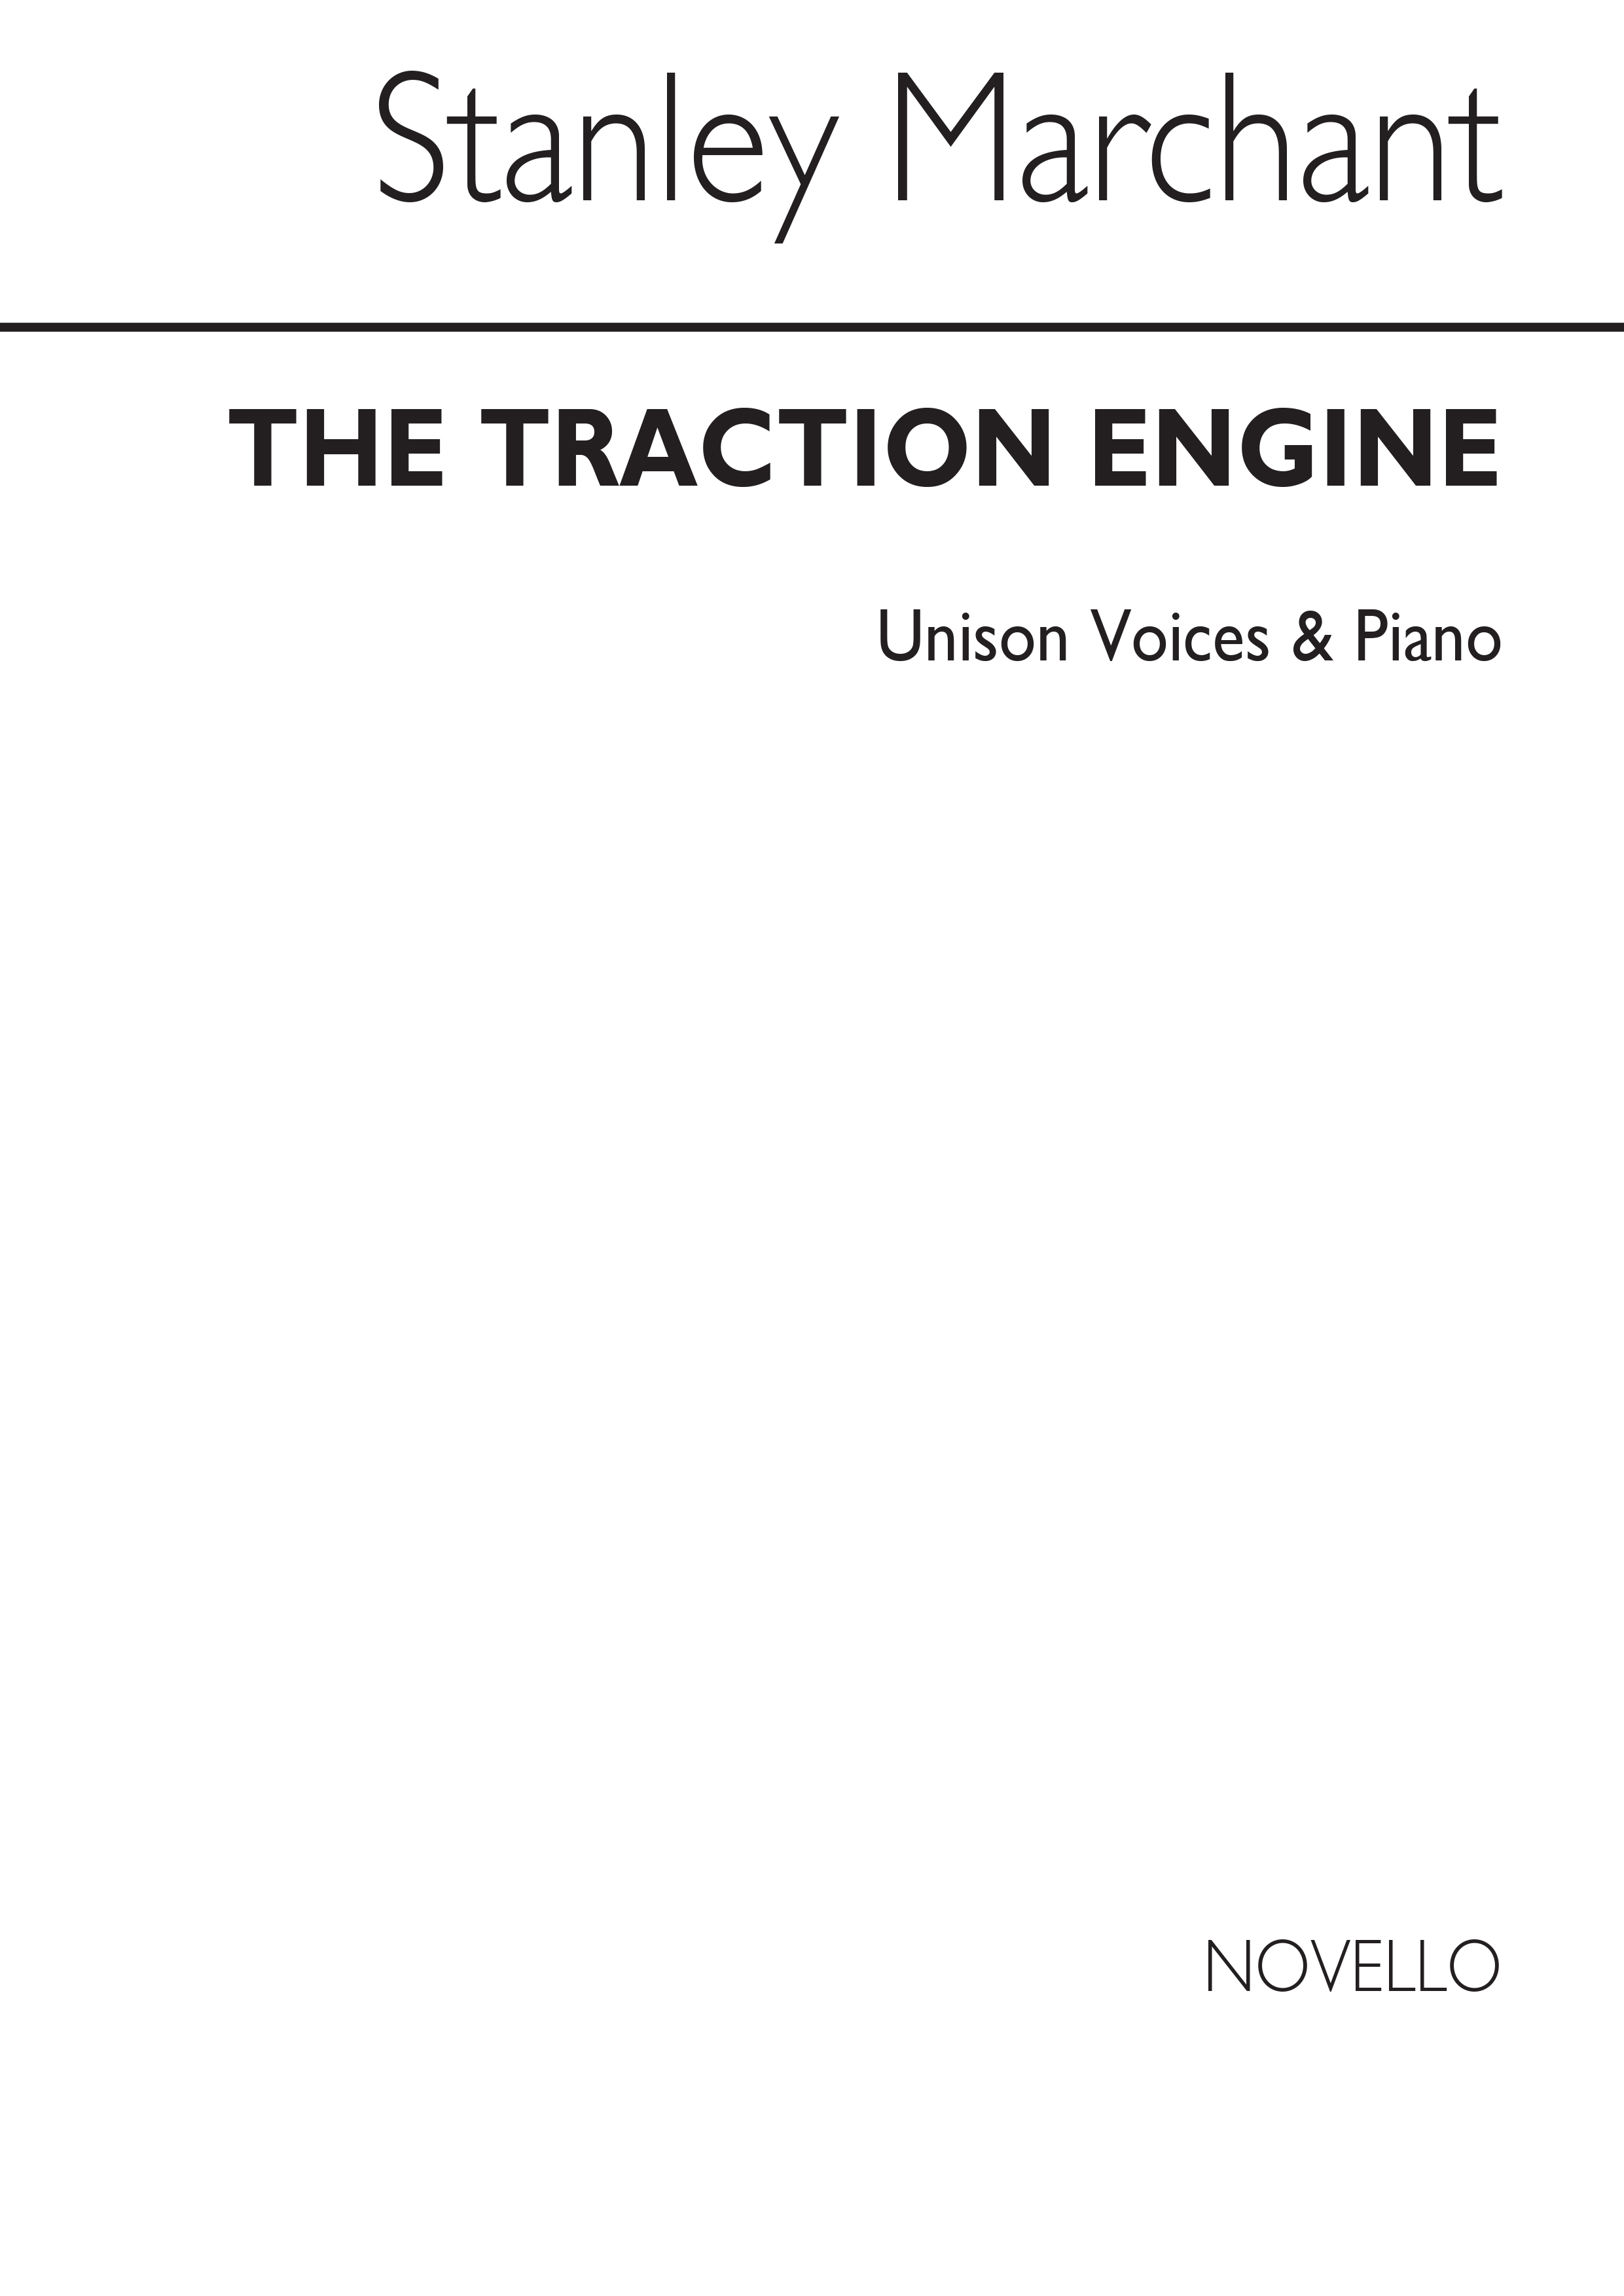 Marchant, S Traction Engine Unison/Piano